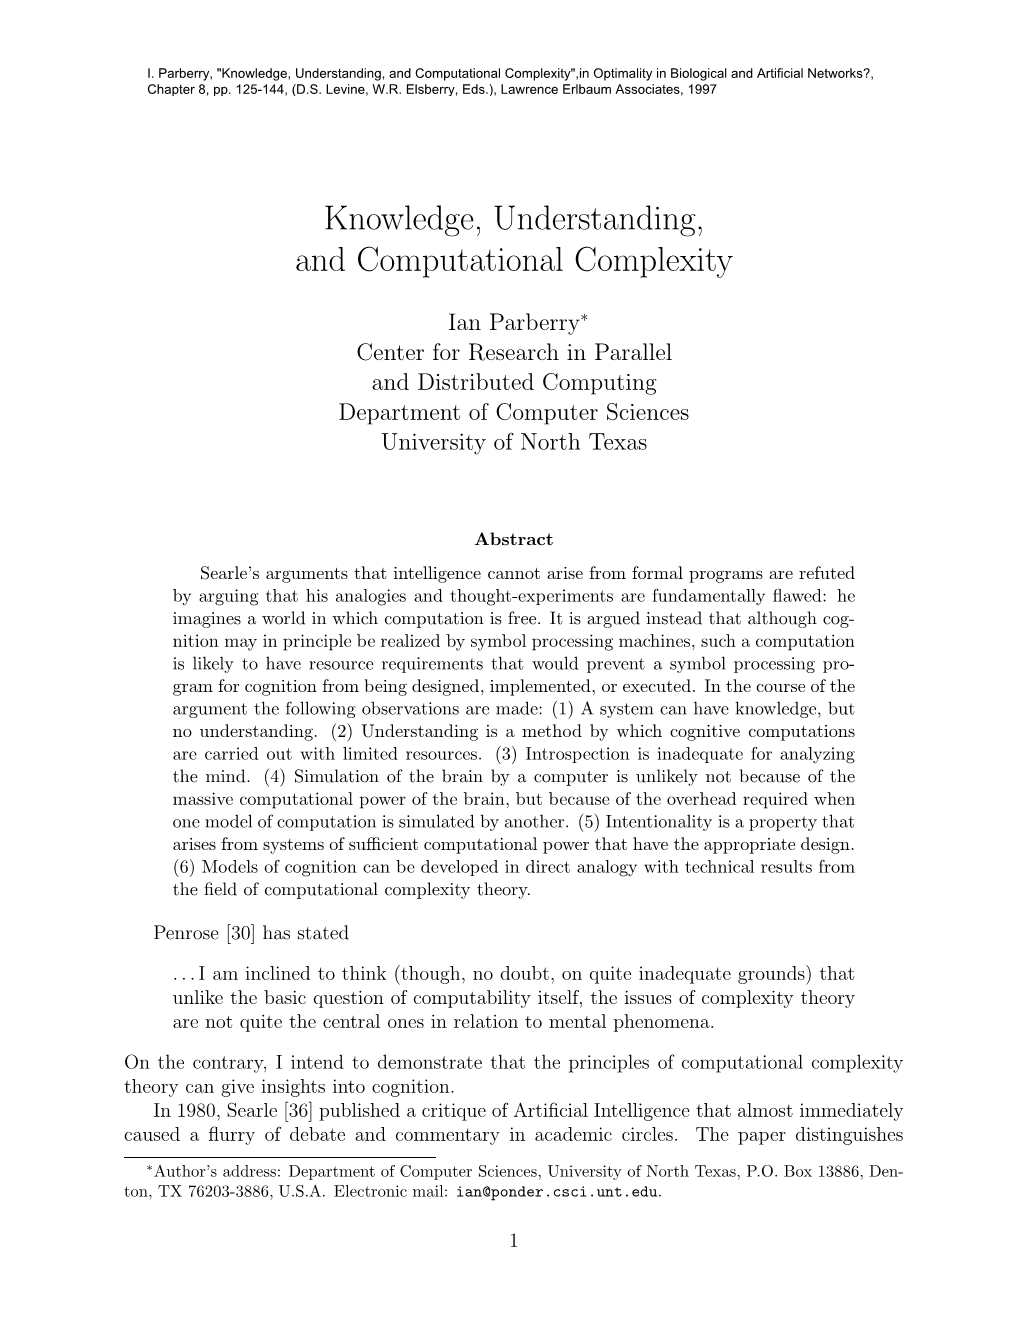 Knowledge, Understanding, and Computational Complexity",In Optimality in Biological and Artificial Networks?, Chapter 8, Pp